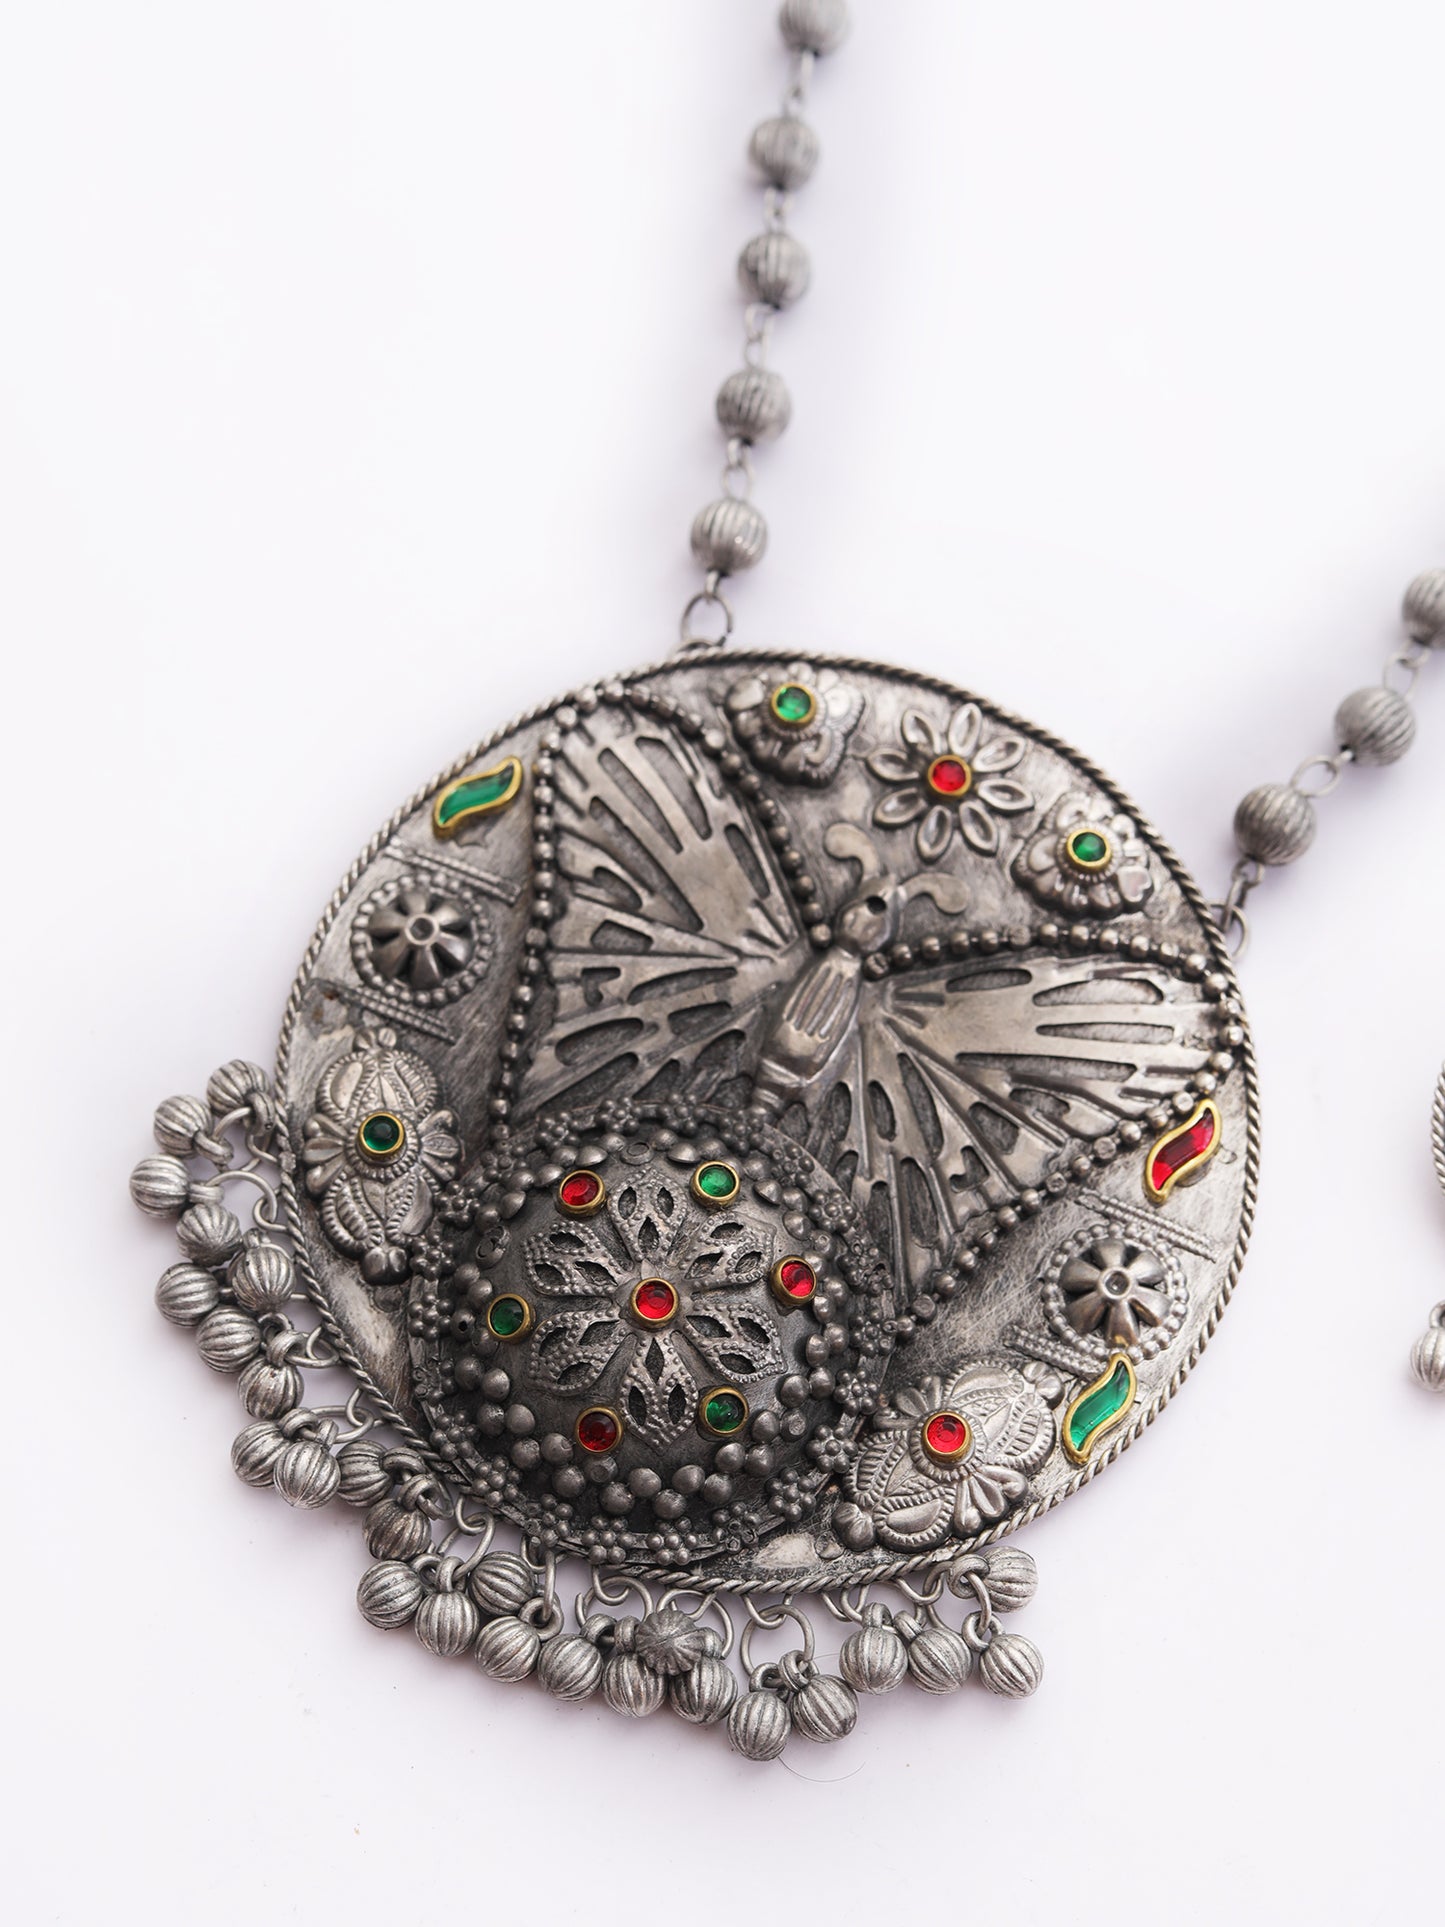 The Groovy Metallic Butterfly Necklace Set in Green & Red Stone